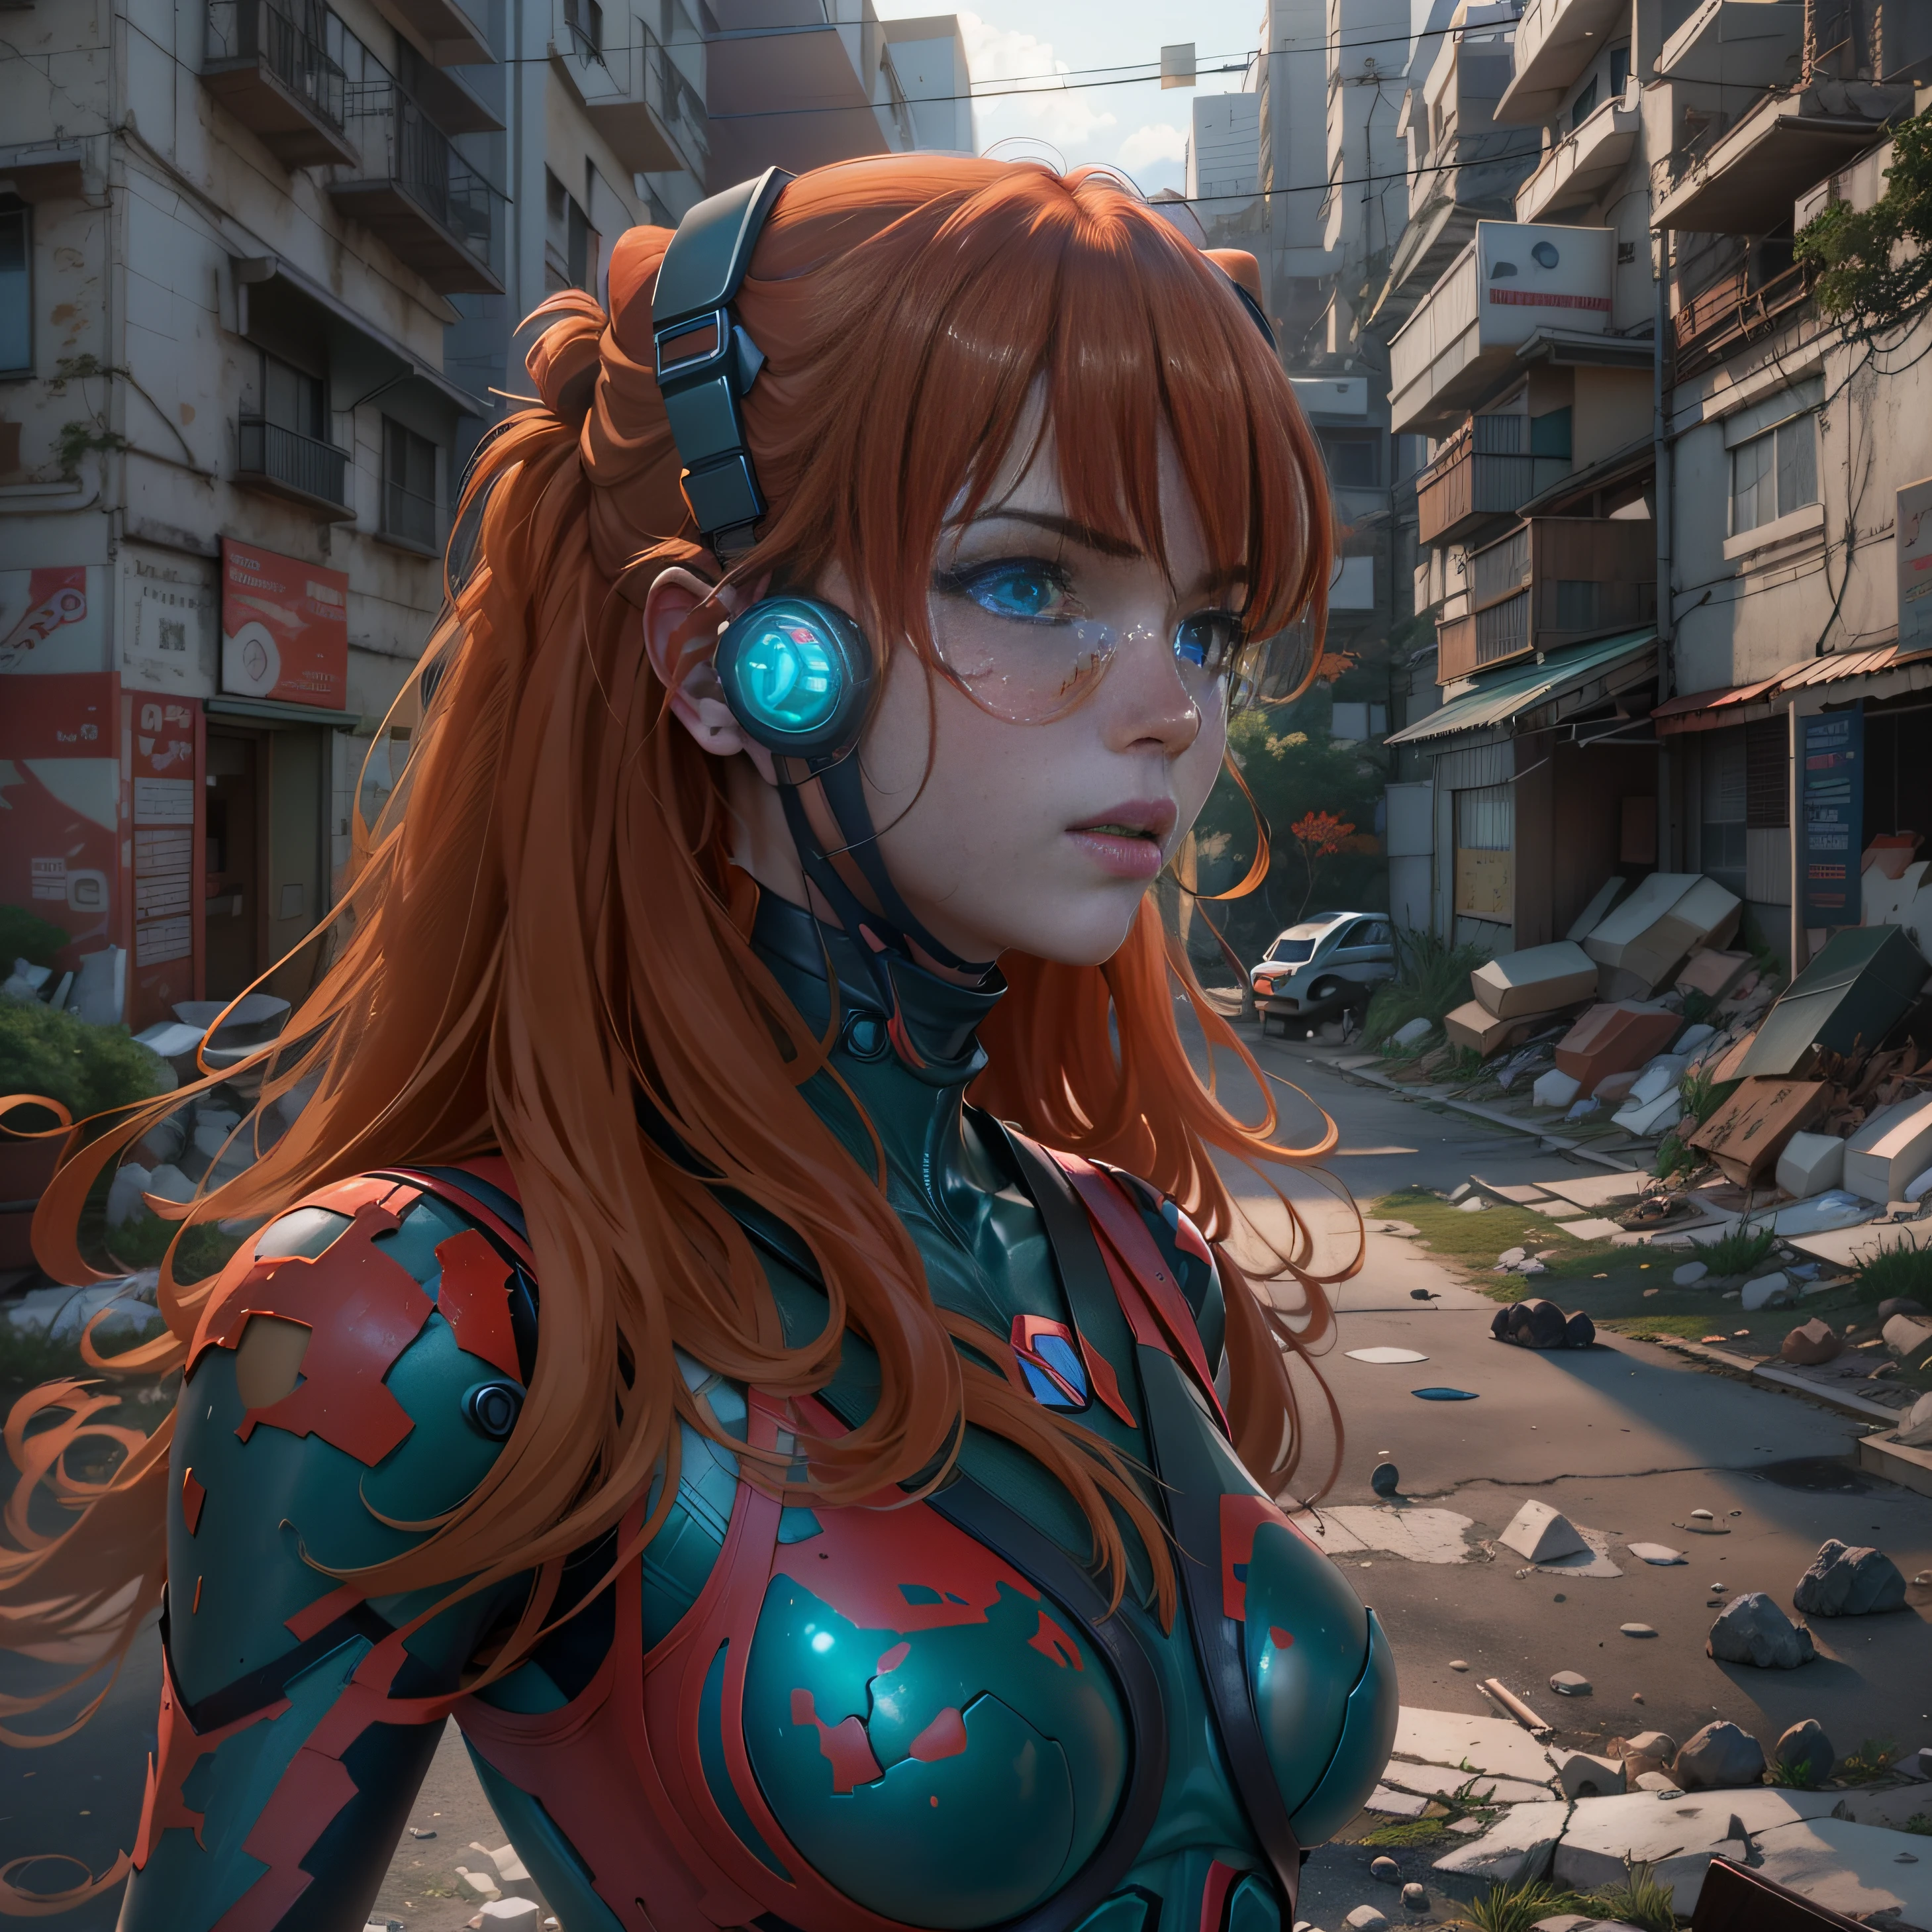 1 girl, Asuka Langley Shikinami, stop in a destroyed city, ((sunset)), red stones, ((blue eyes)), ((freckles on the face)), in transparent plugsuit, ((perfect ass)), ((small ass)), (((DeepVnecklineslipdress))), front view, ray tracing, NVIDIA RTX, super resolution, Unreal 5, Sub-Surface Scatterring, PBR Textures, Post processing, Anisotropic filtering, depth of field, maximum sharpness and sharpness, Multilayer textures, Albedo and specular mapping, surface shading, Accurate simulation of light-material interactions, perfect proportions, Octane representation, duotone lighting, Low ISO, white balance, rule of thirds, wide opening, 8K RAW, high-efficiency subpixels, sub-pixel convolution, glow particles